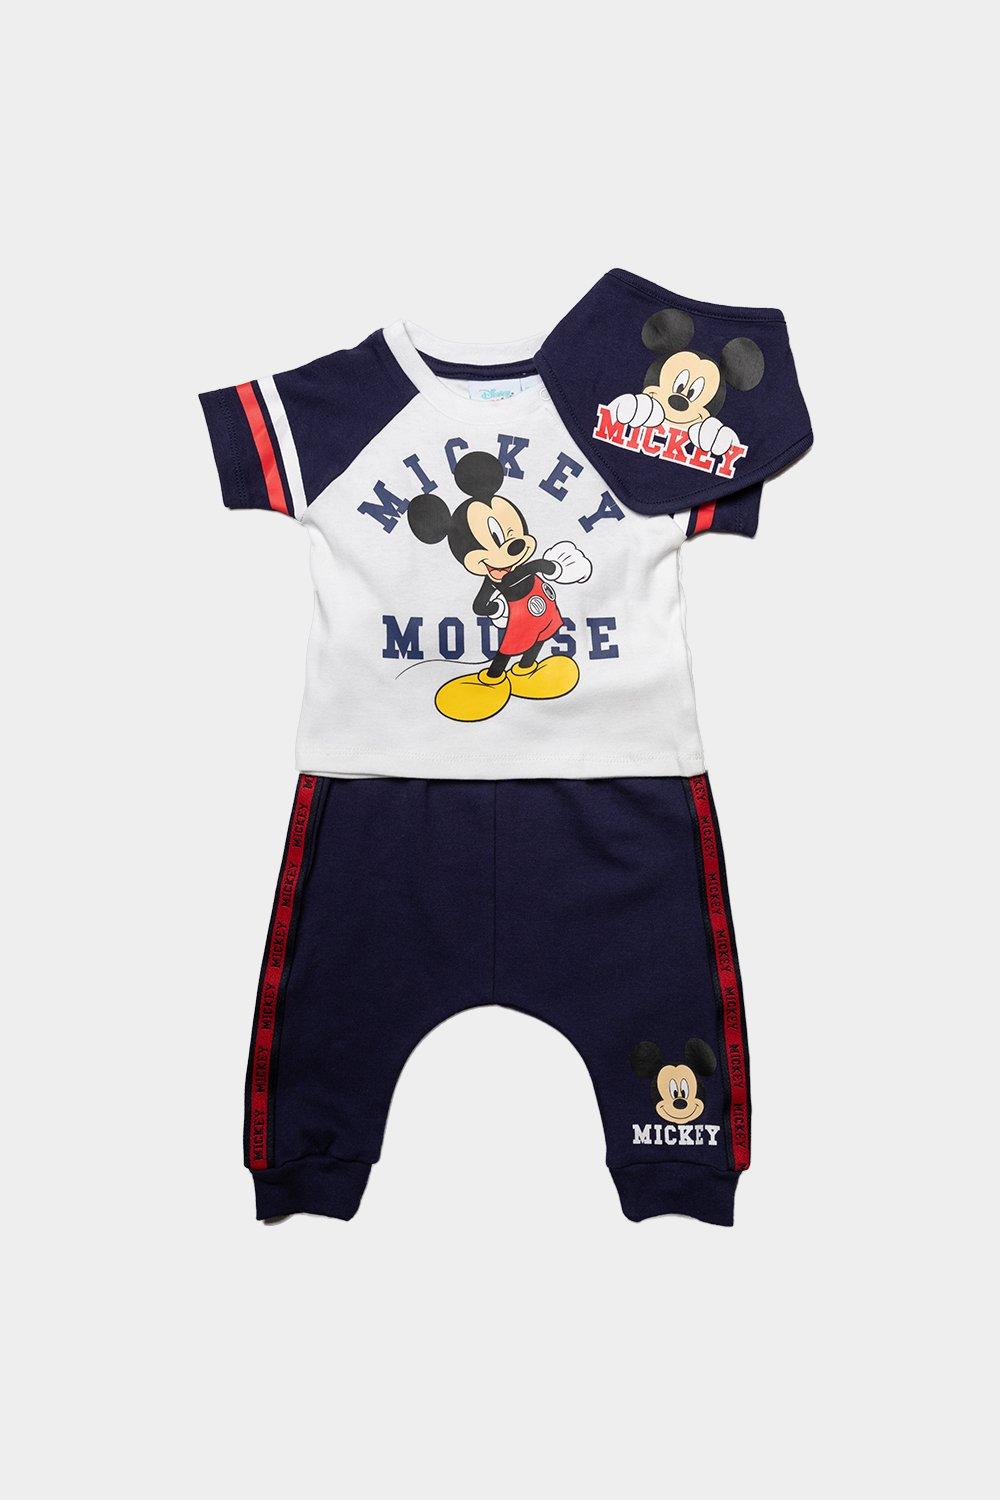 Disney Baby Boy's Mickey Mouse Sporty 3-Piece Outfit|Size: 6-12 m|blue